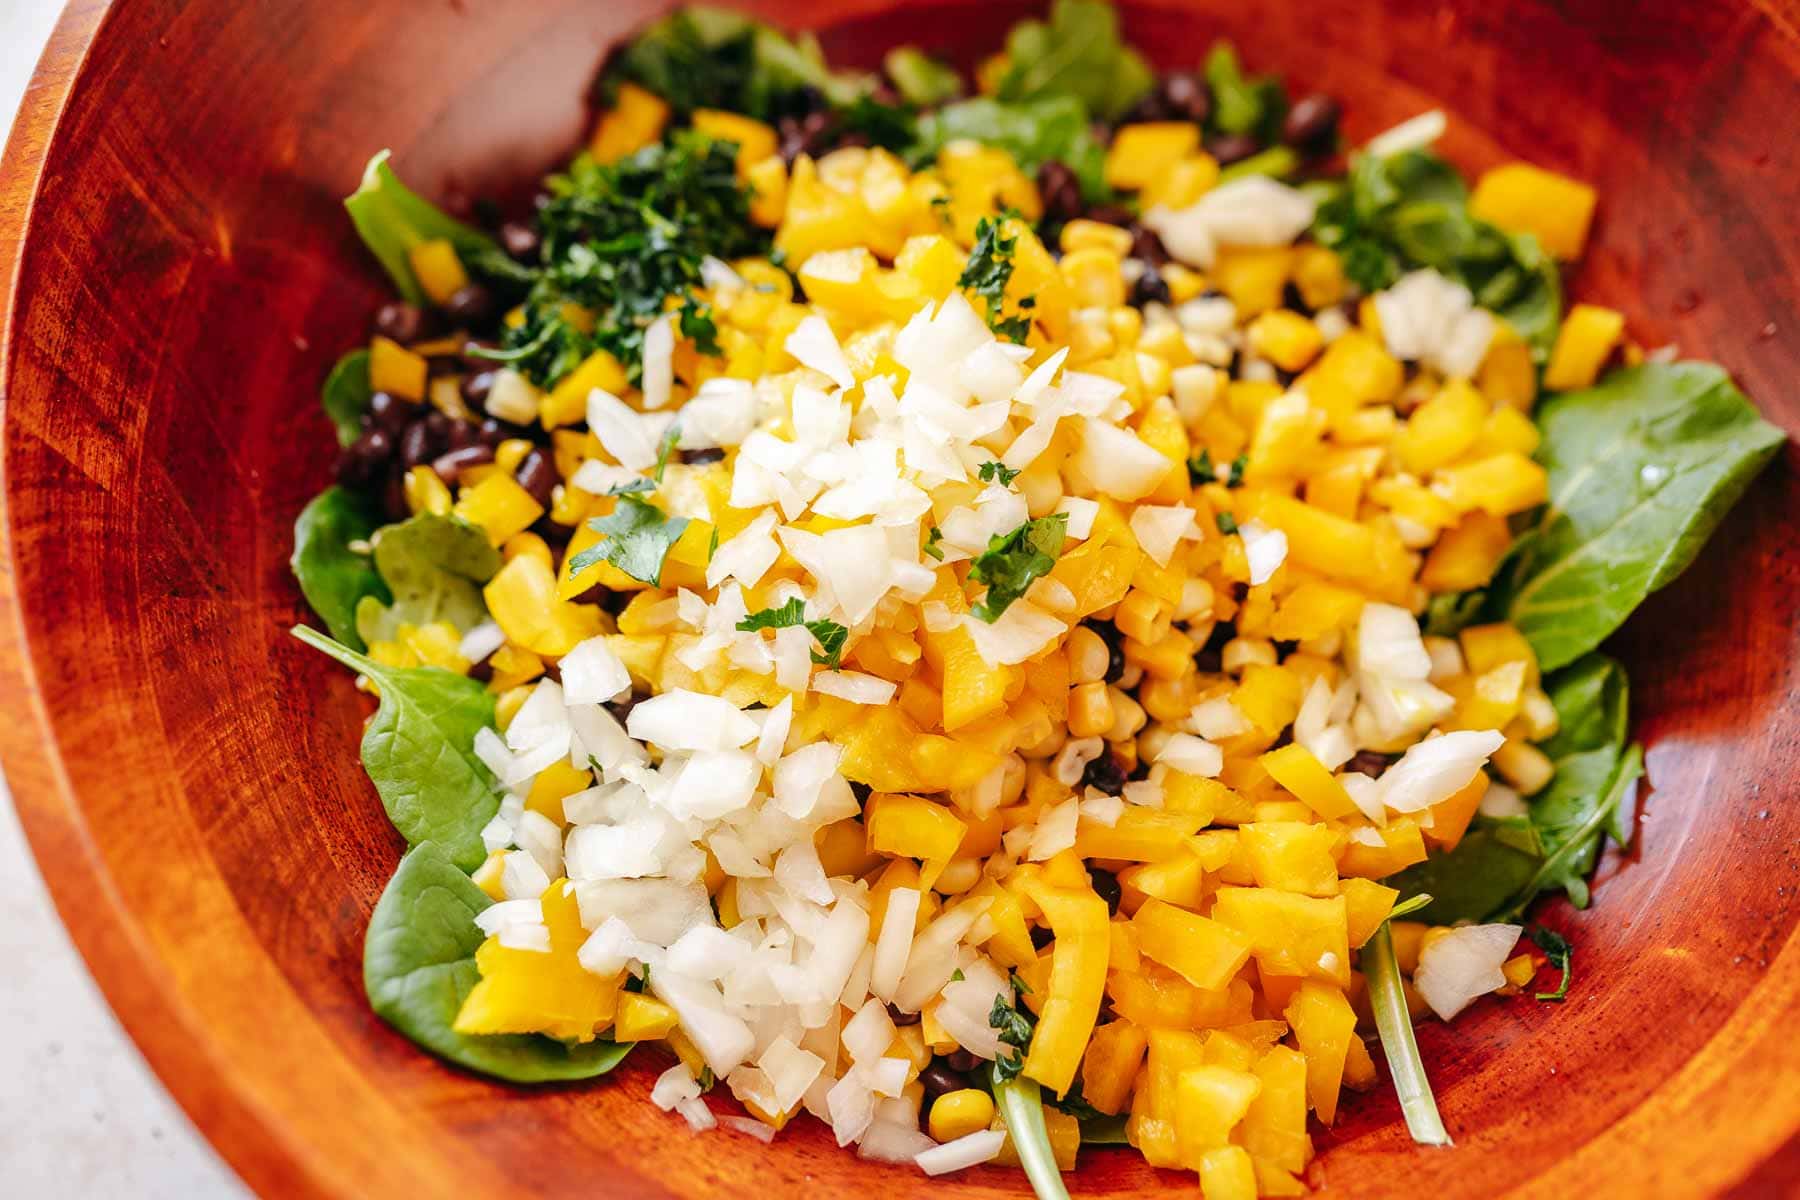 A large salad bowl filled with various salad ingredients.